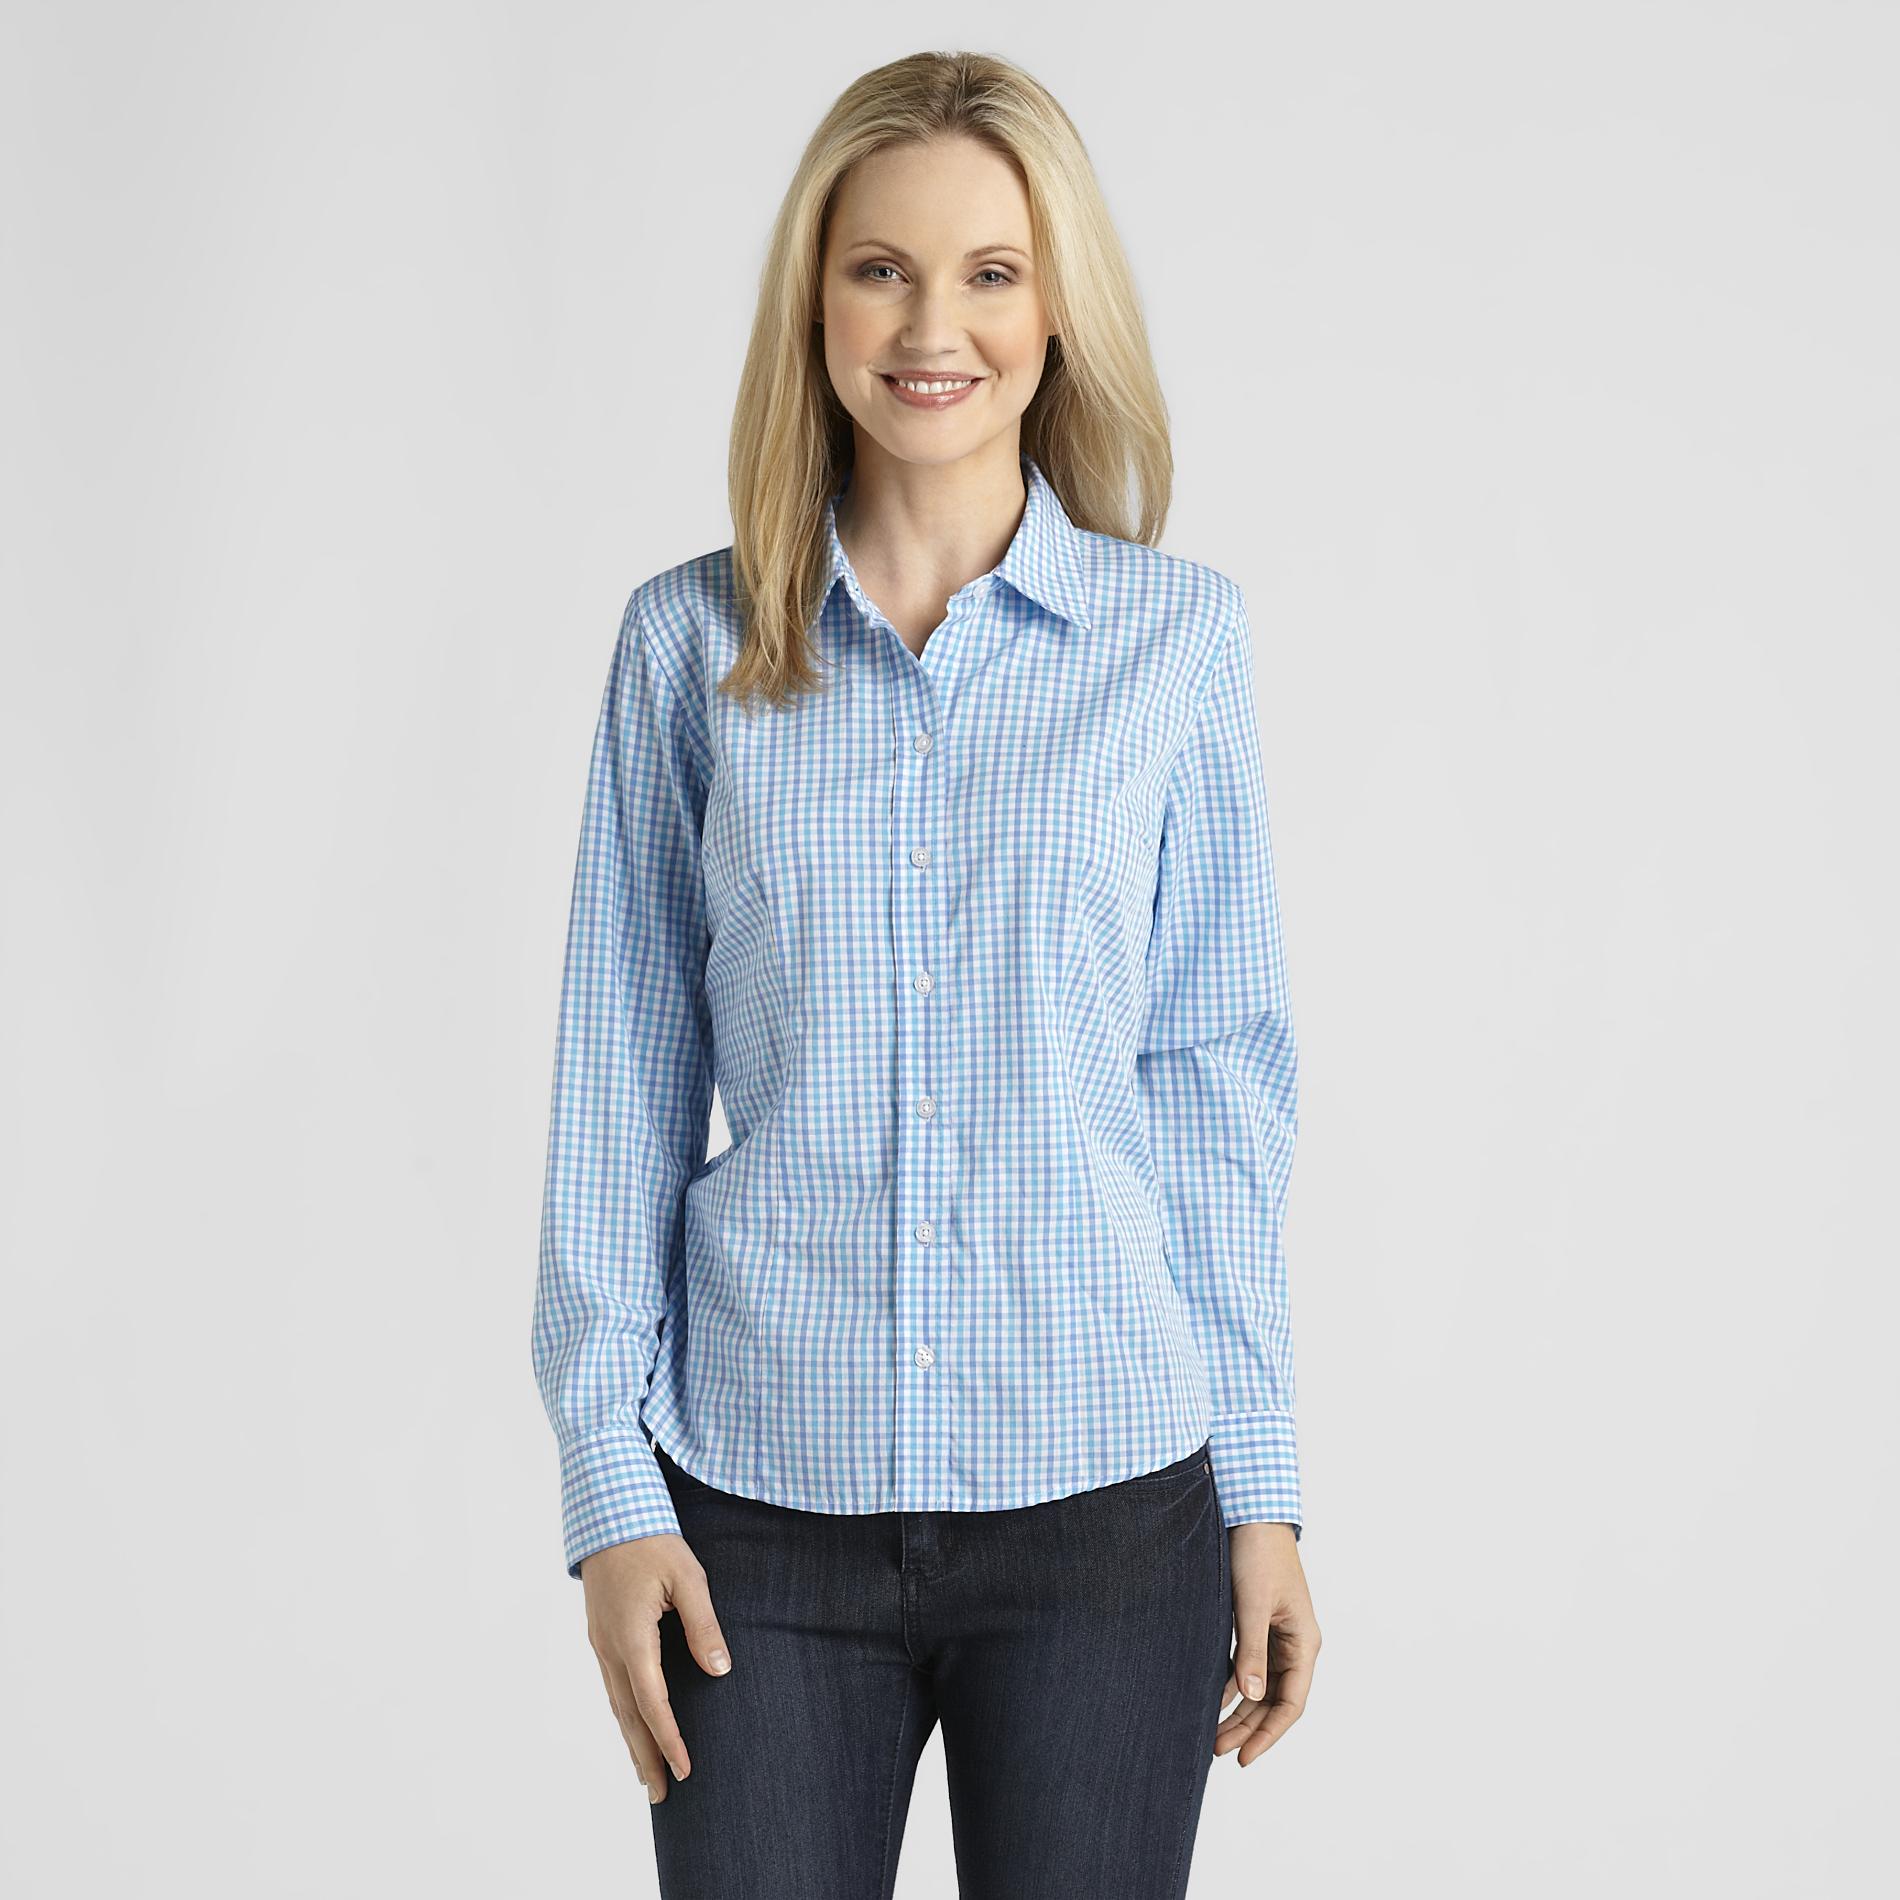 Basic Editions Women's Easy Care Shirt - Checkered